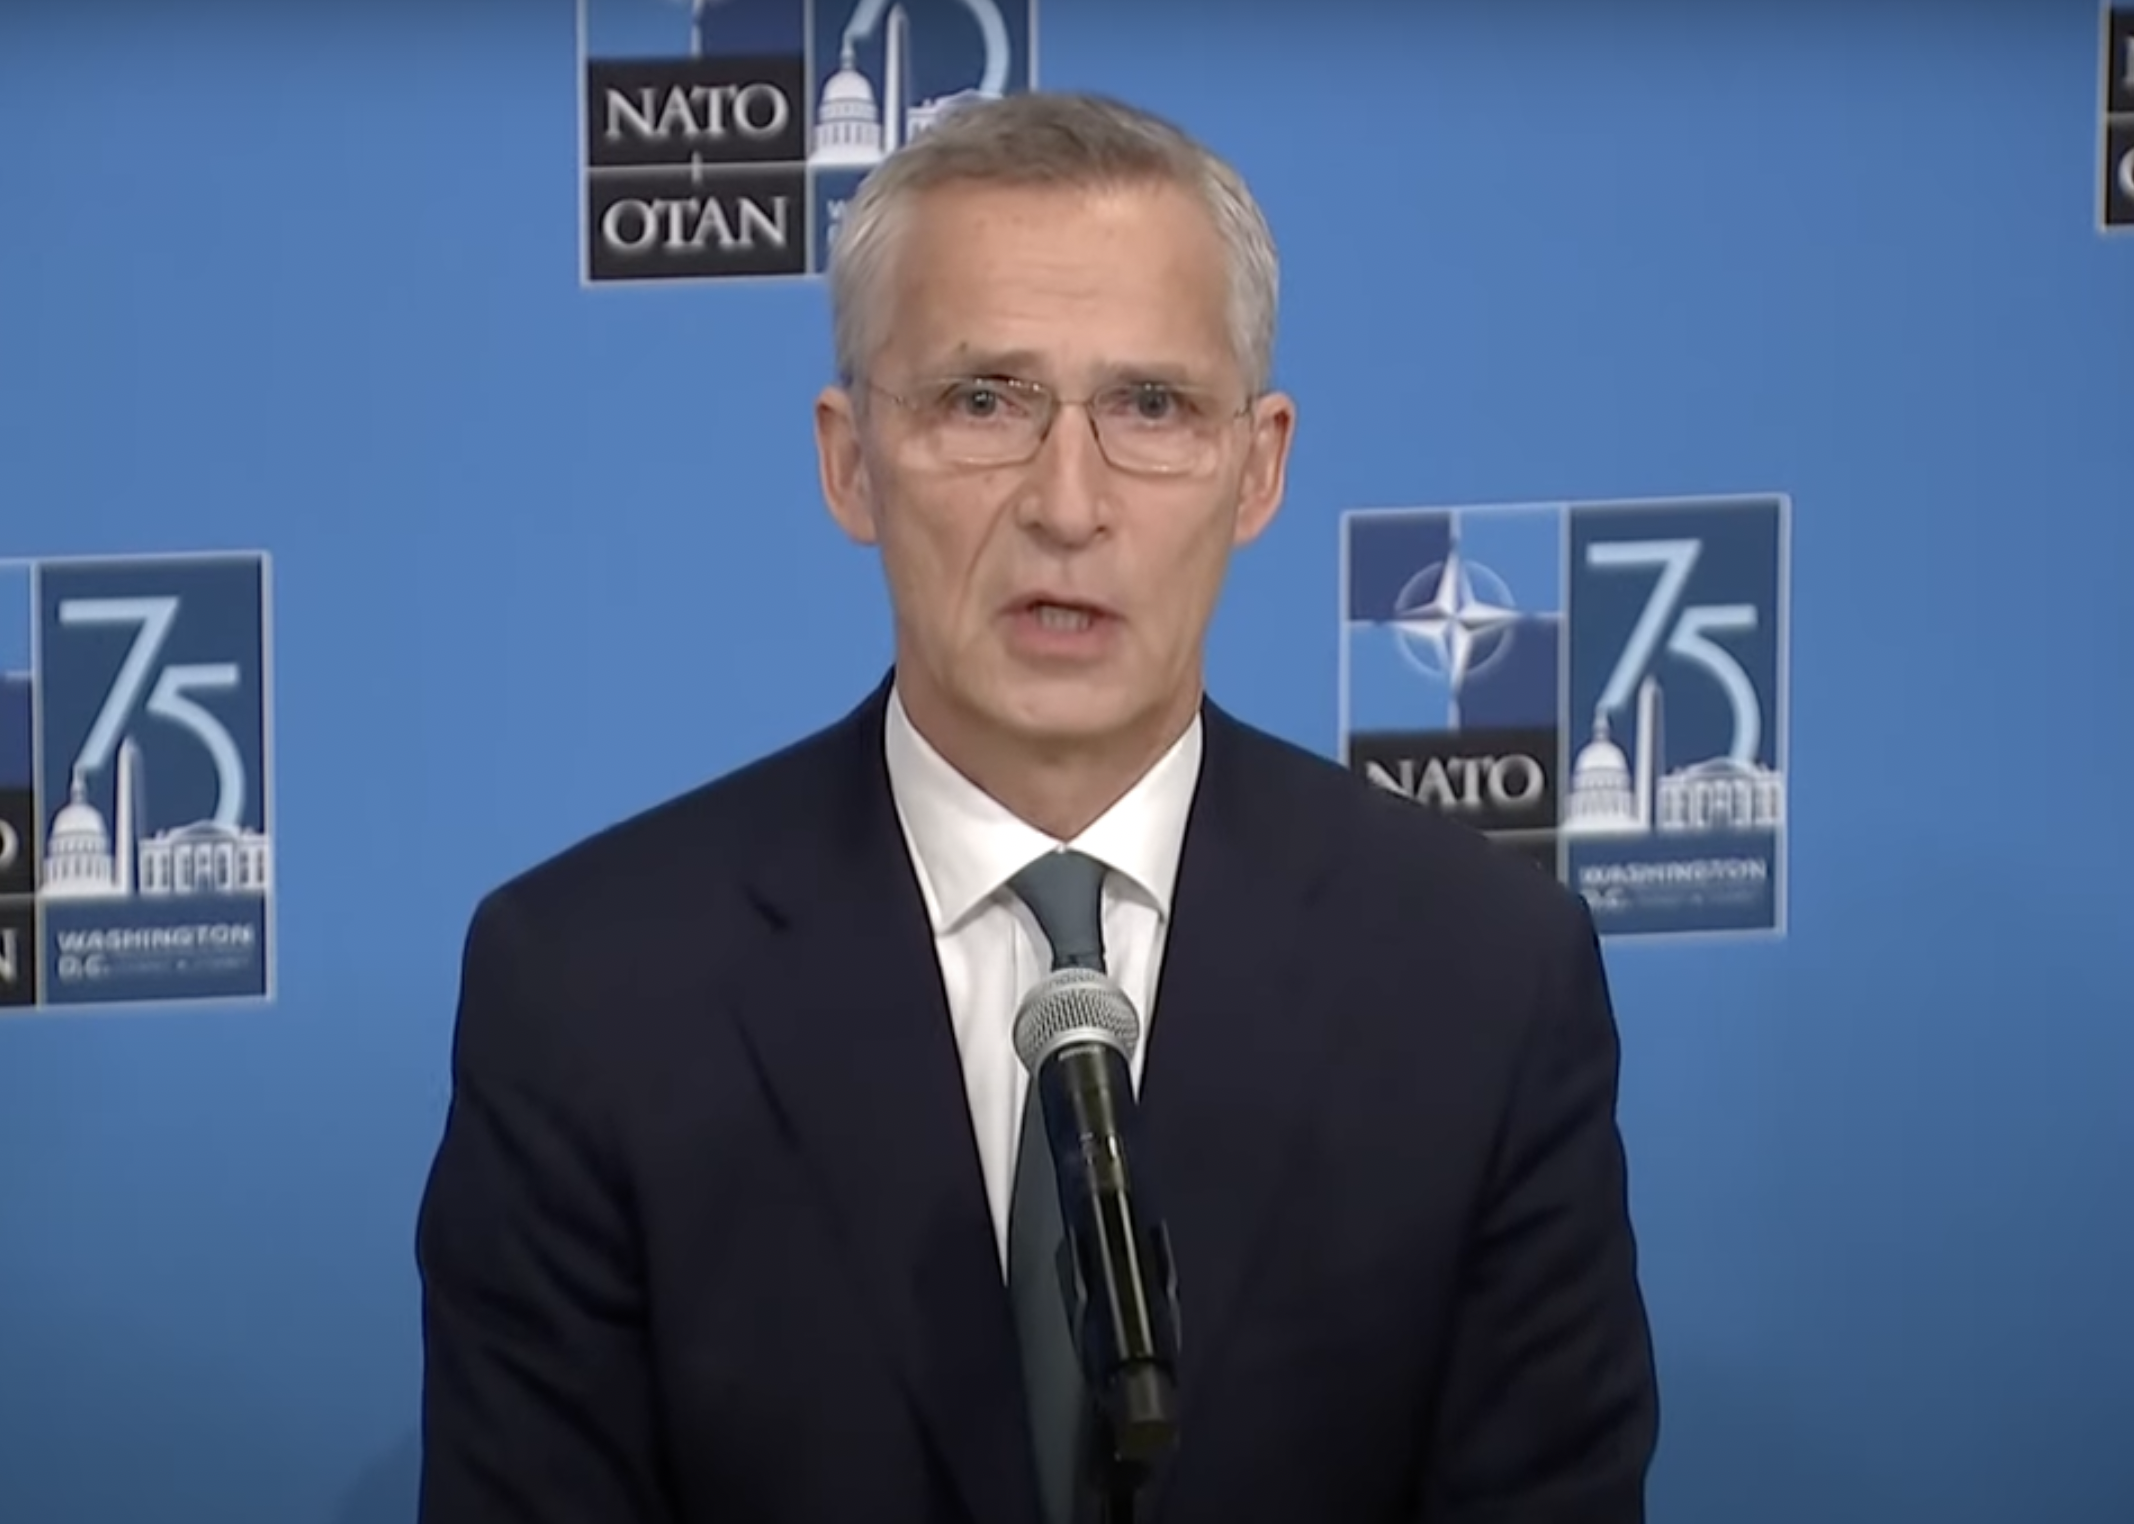 NATO Plans Upgrades for Air and Missile Defense on Its Eastern Flank